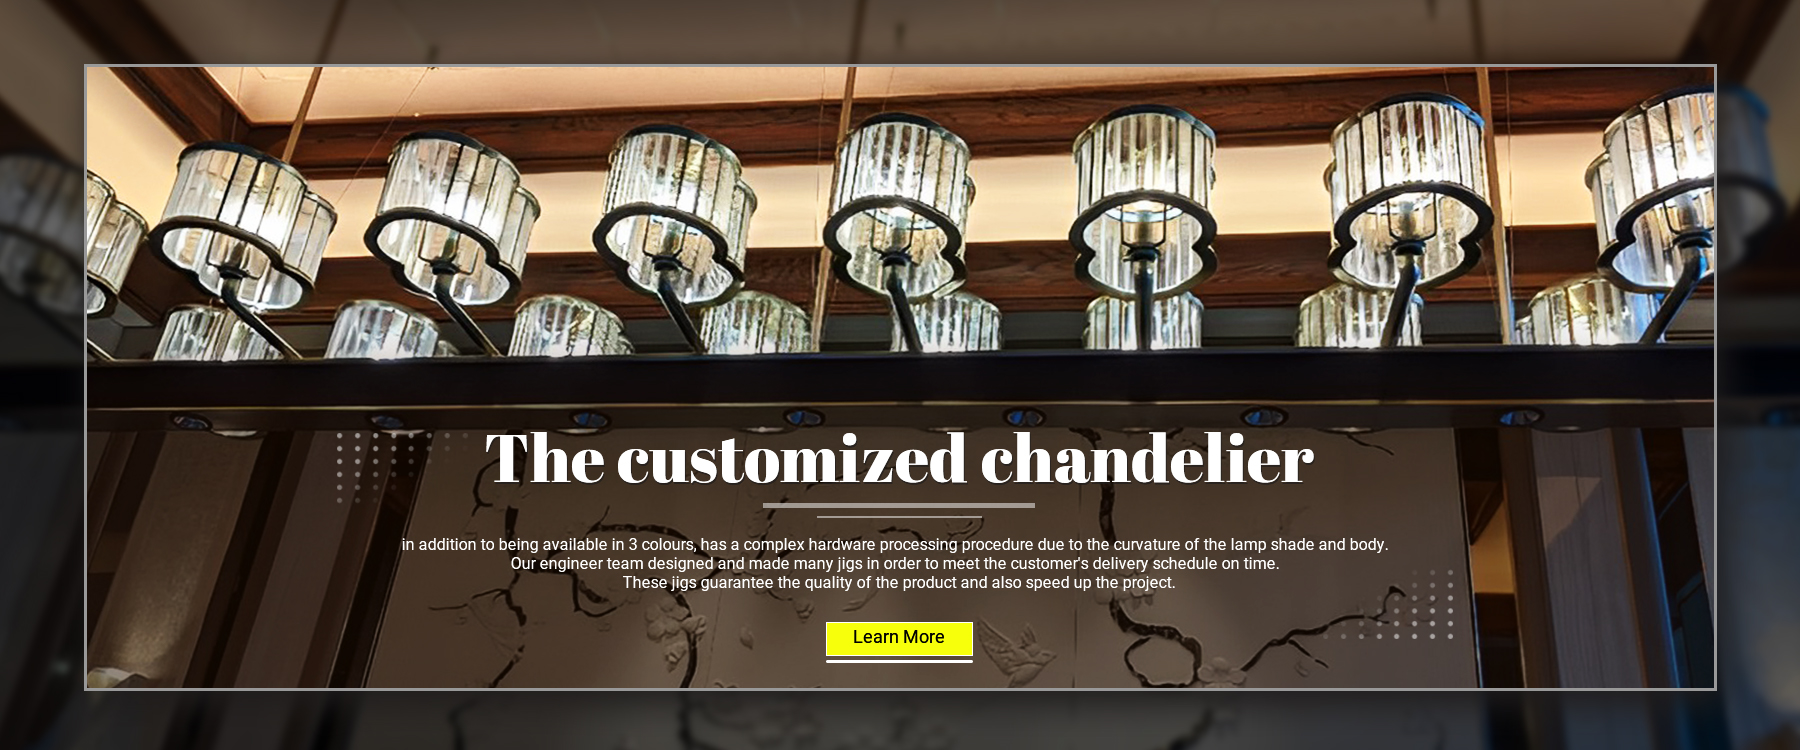 The customized chandelier